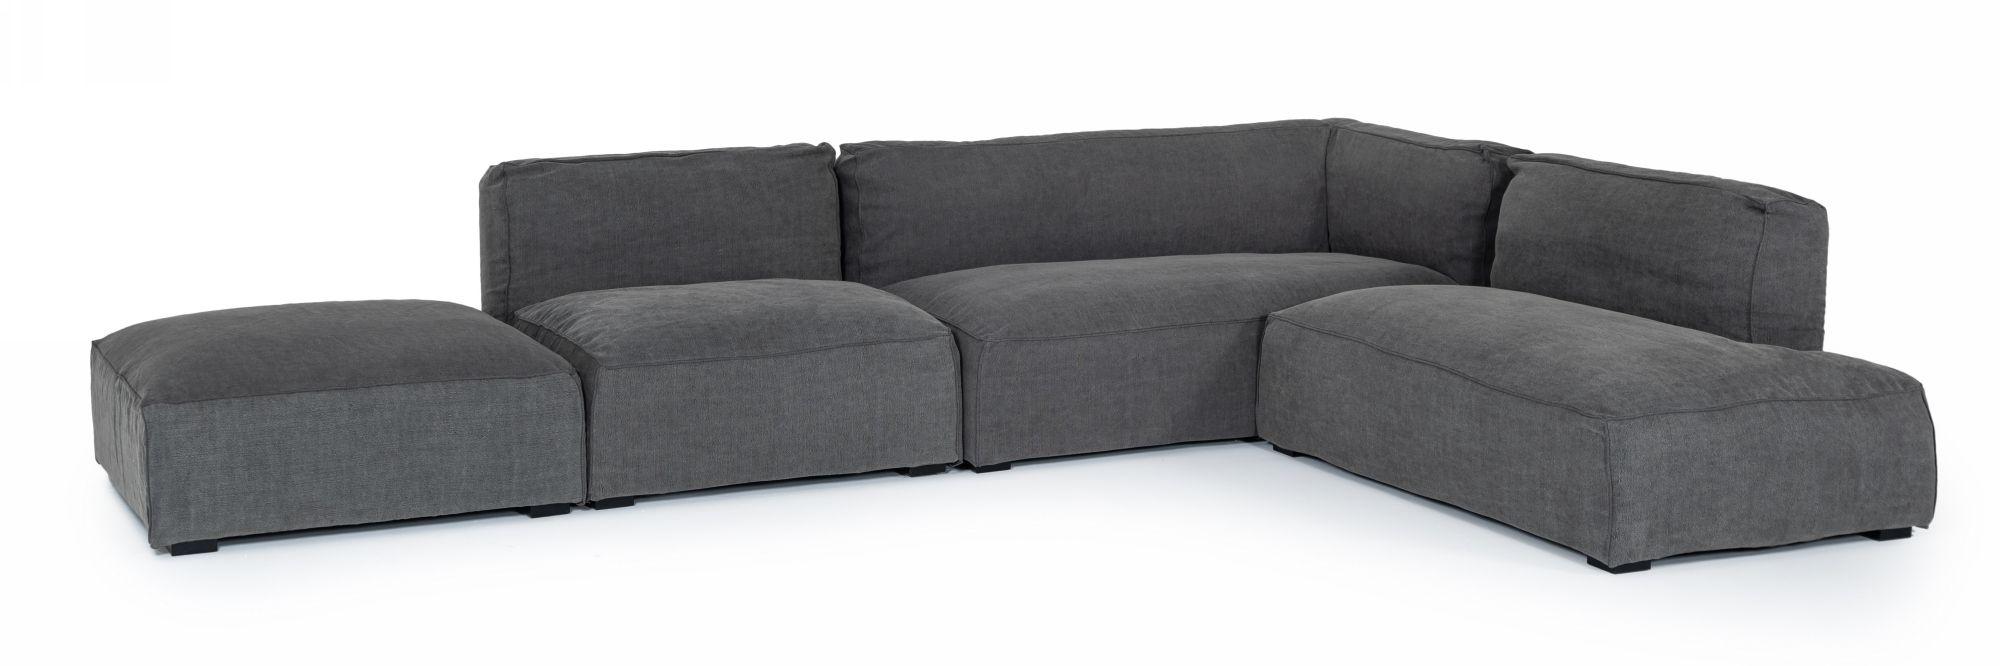 Contemporary, Modern Sectional Sofa VGAFCUBE VGAFCUBE in Gray Fabric